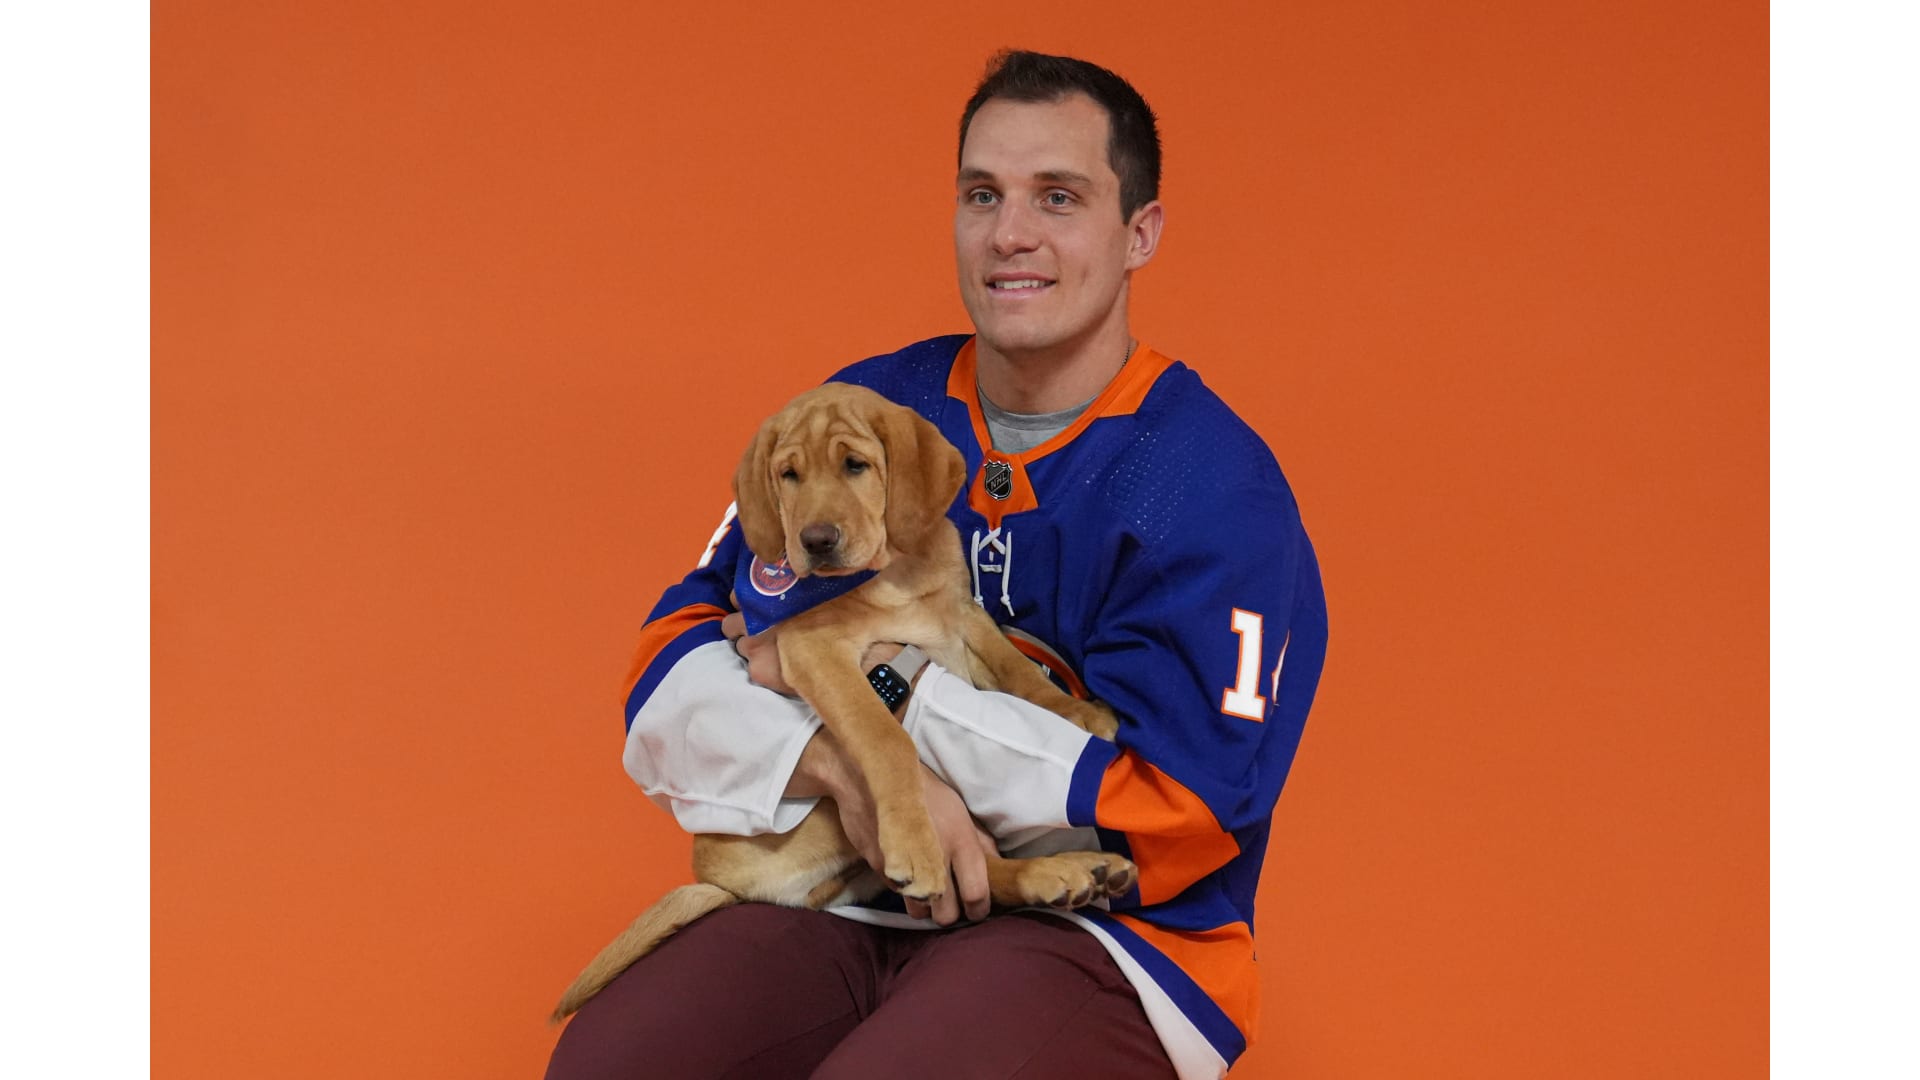 The New York Islanders need help naming their new service puppy